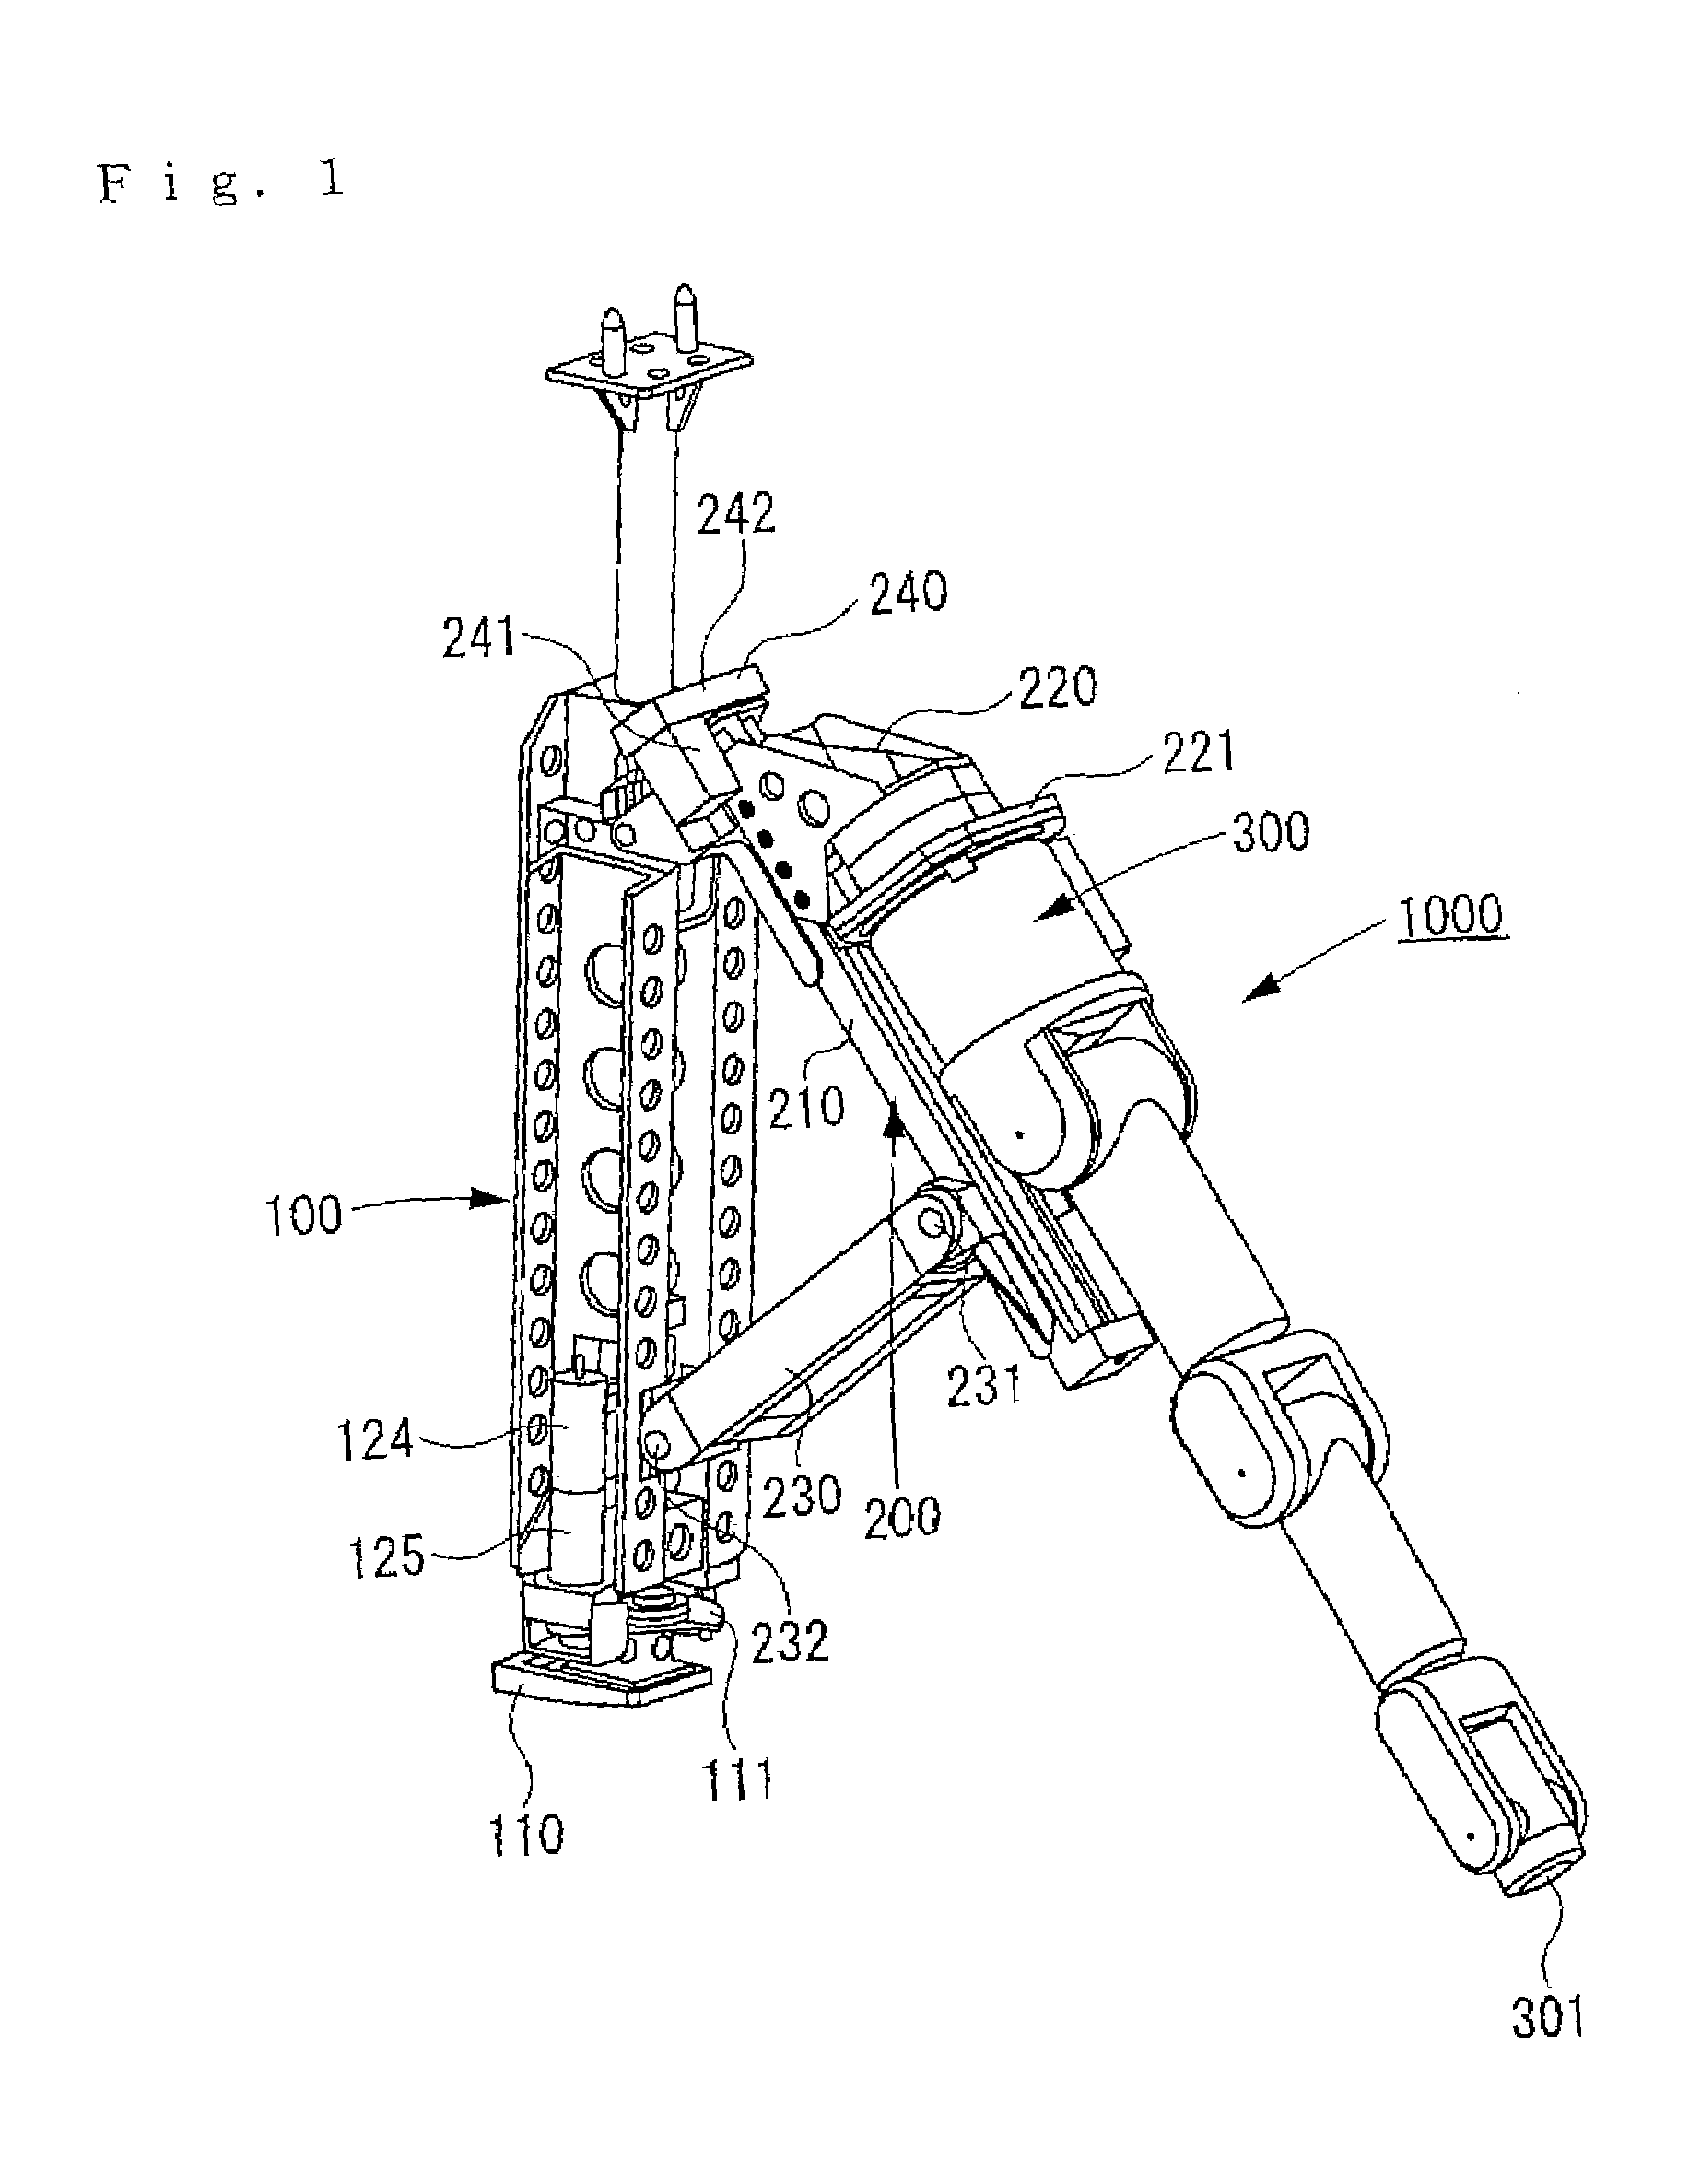 Tip tool guide apparatus and method for bringing in tip tool guide apparatus